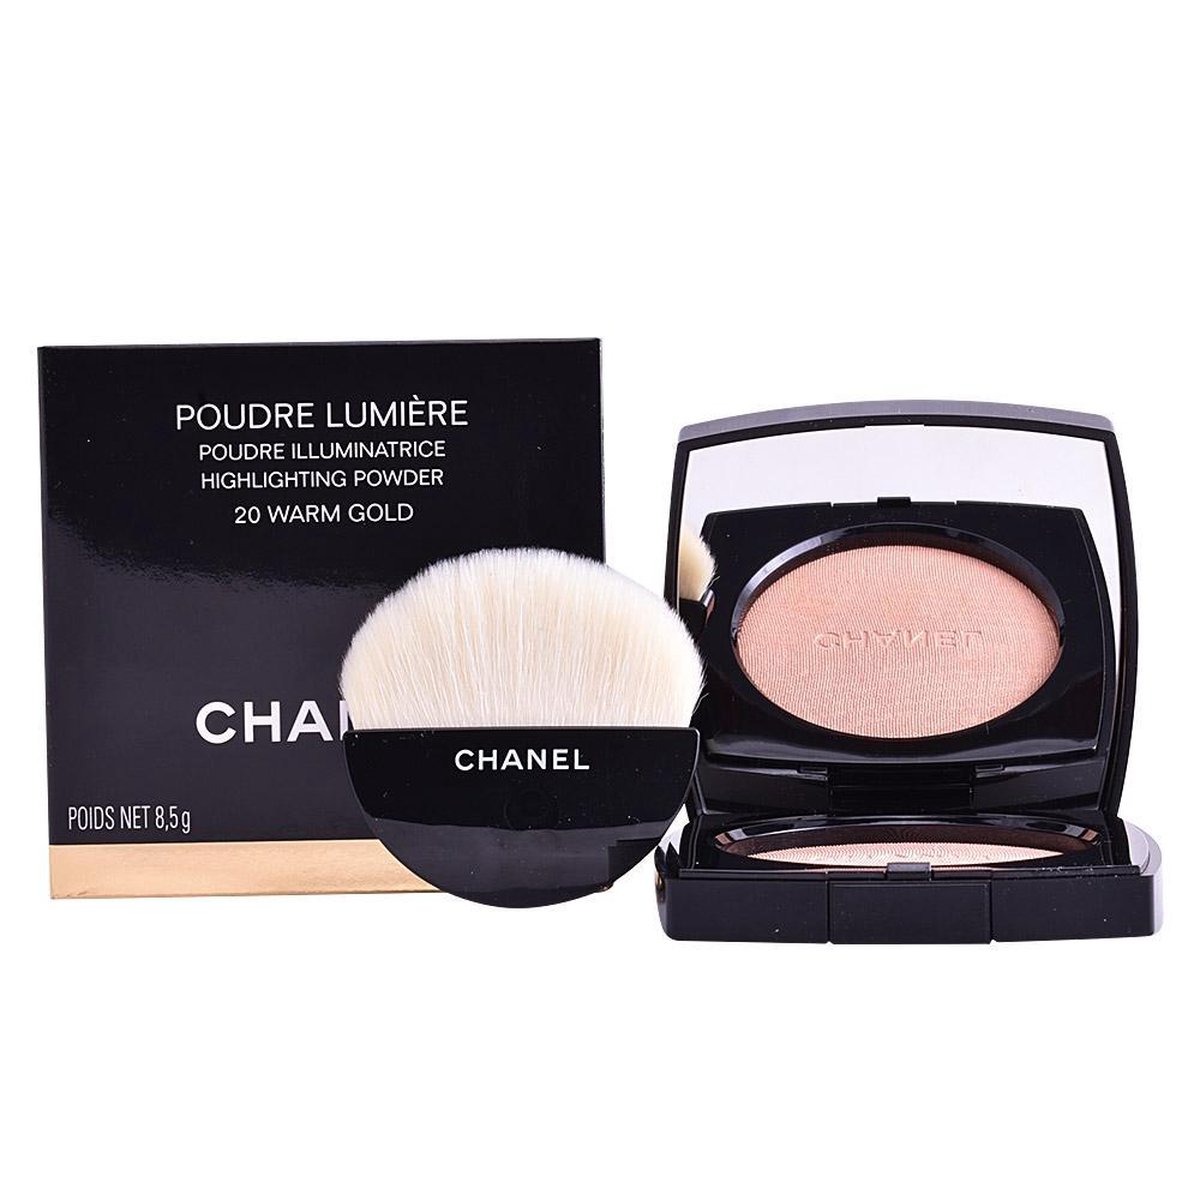 Chanel Poudre Lumière Highlighting Powder Highlighter - 20 Warm Gold - 8,5  g - highlighter